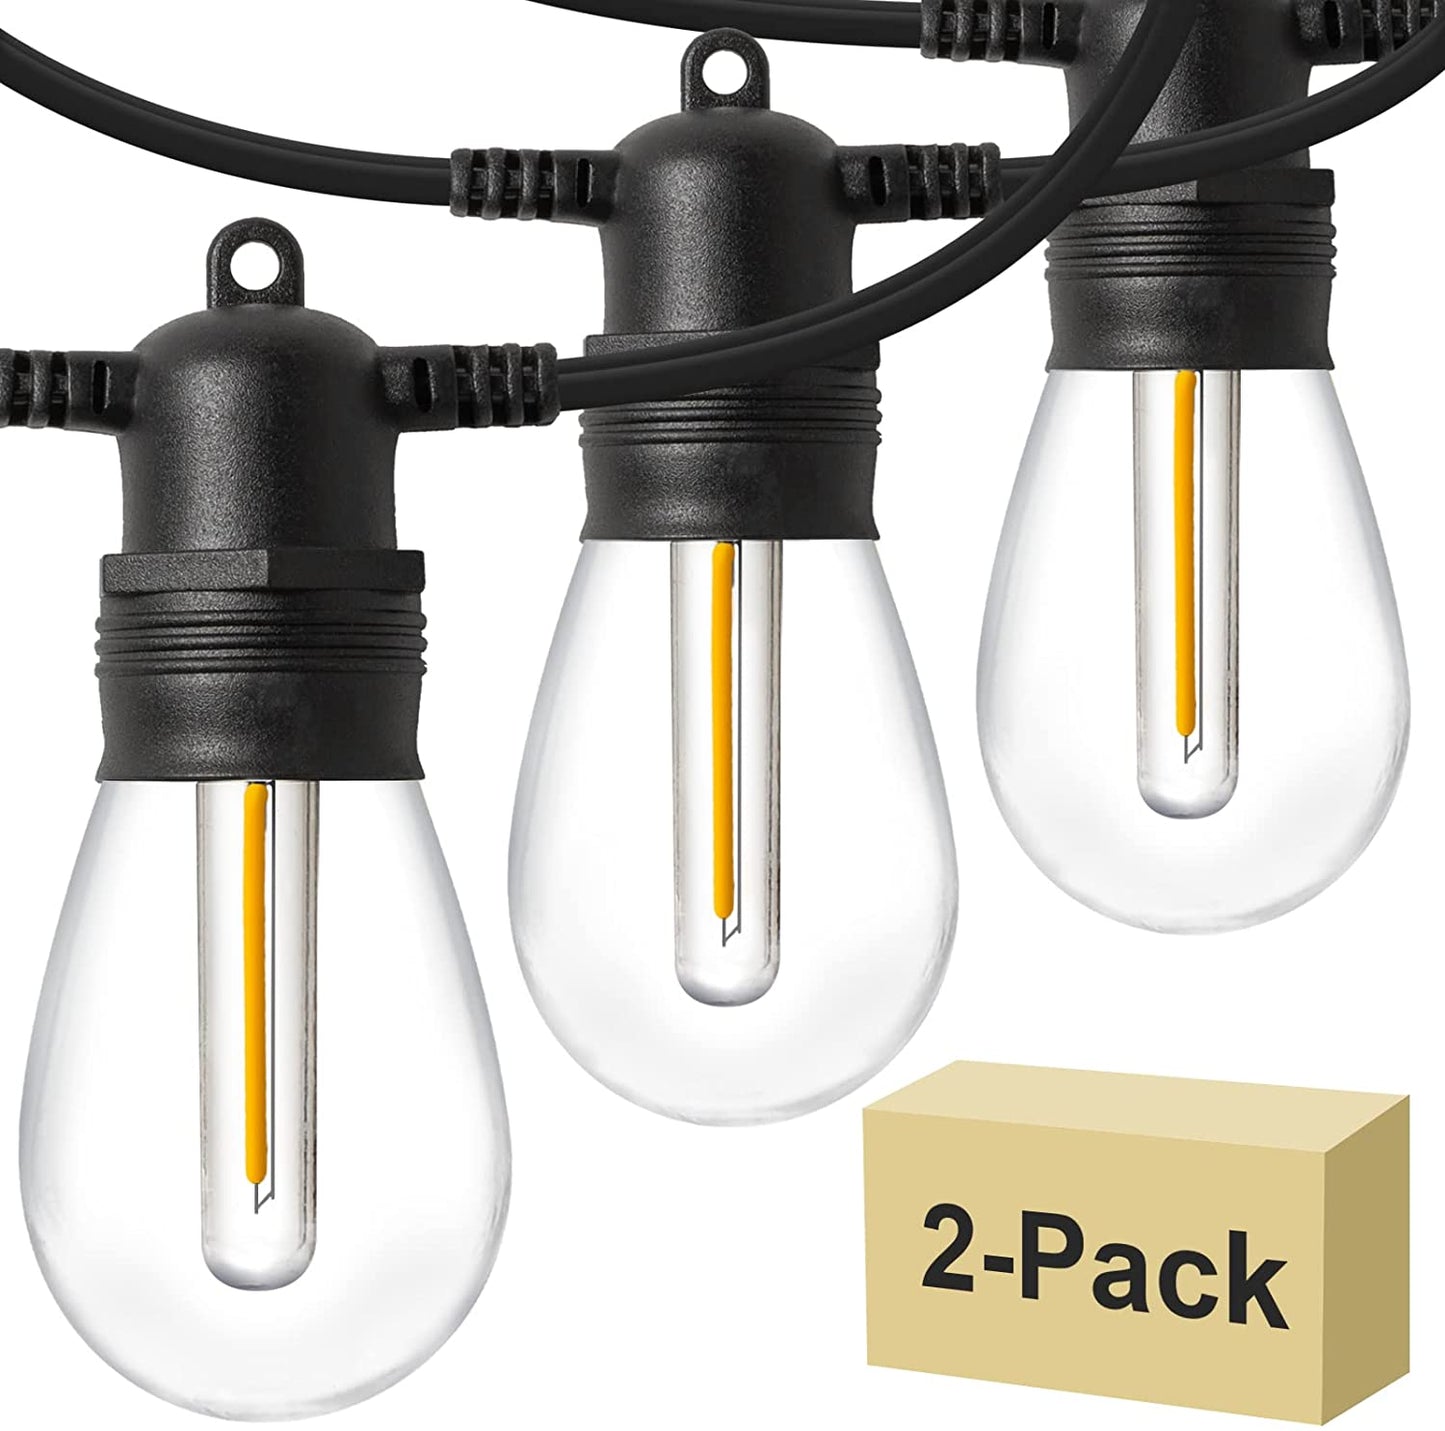 LED Outdoor String Lights 48Ft with Dimmable Edison Vintage Shatterproof Bulbs and Commercial Grade Weatherproof Strand Heavy-Duty Decorative Cafe, Patio, Market Light